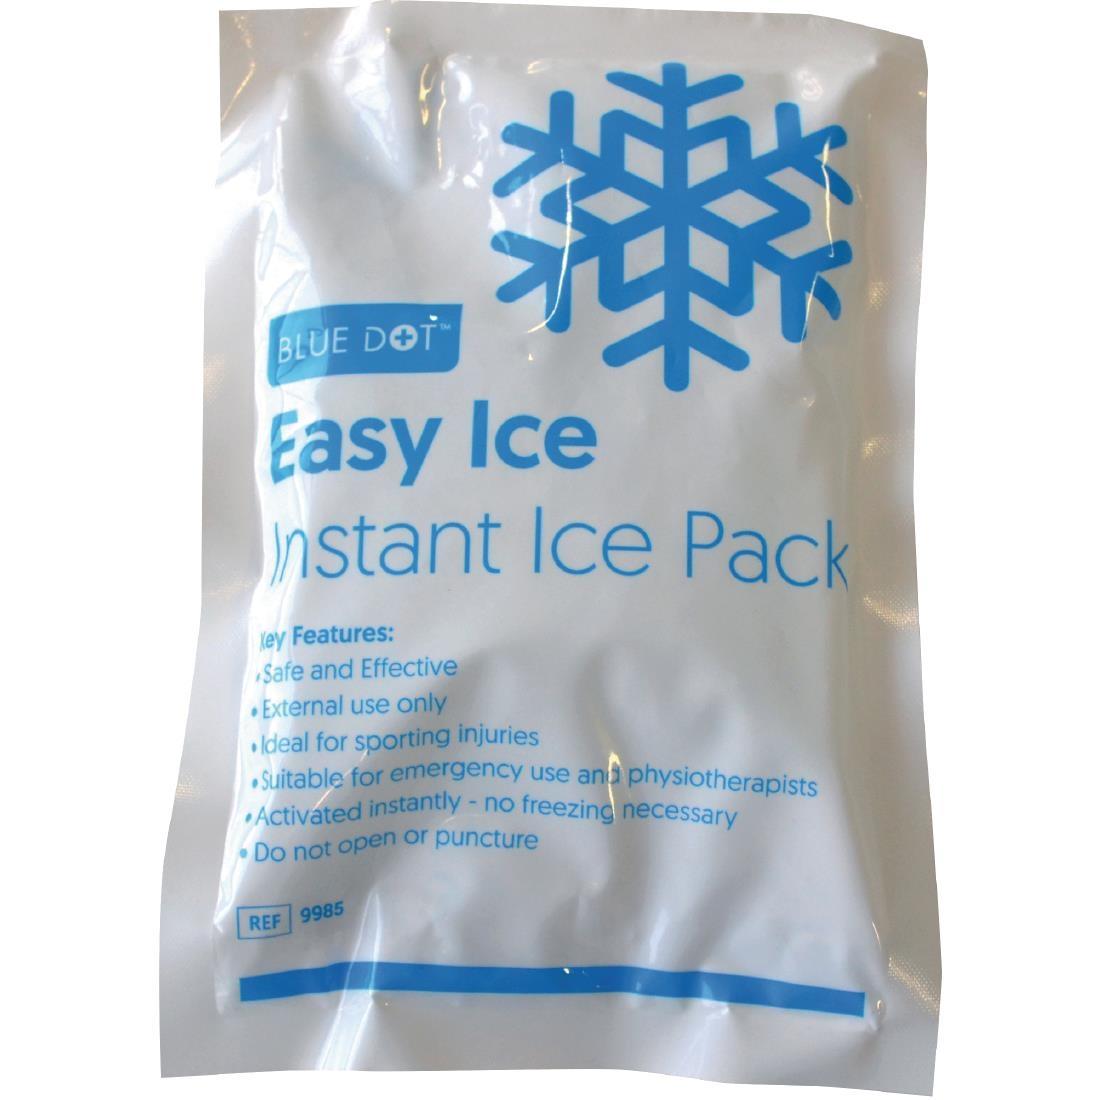 Easy Ice Disposable Instant Ice Pack - DC125  - 1